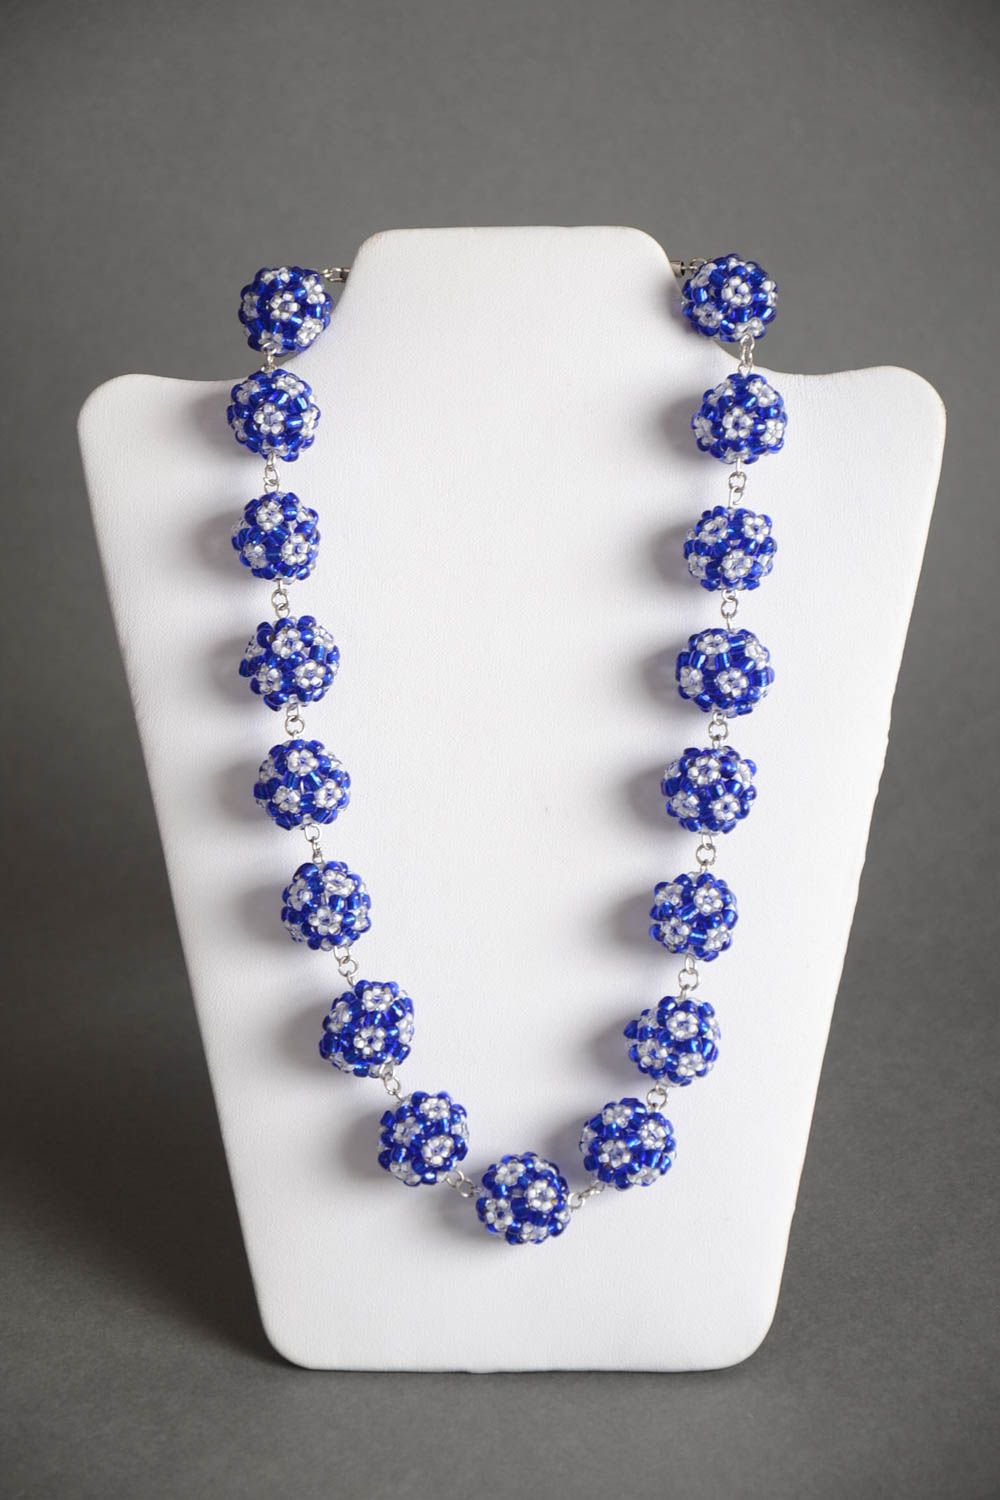 Handmade designer women's necklace with balls crocheted of blue and white beads photo 2